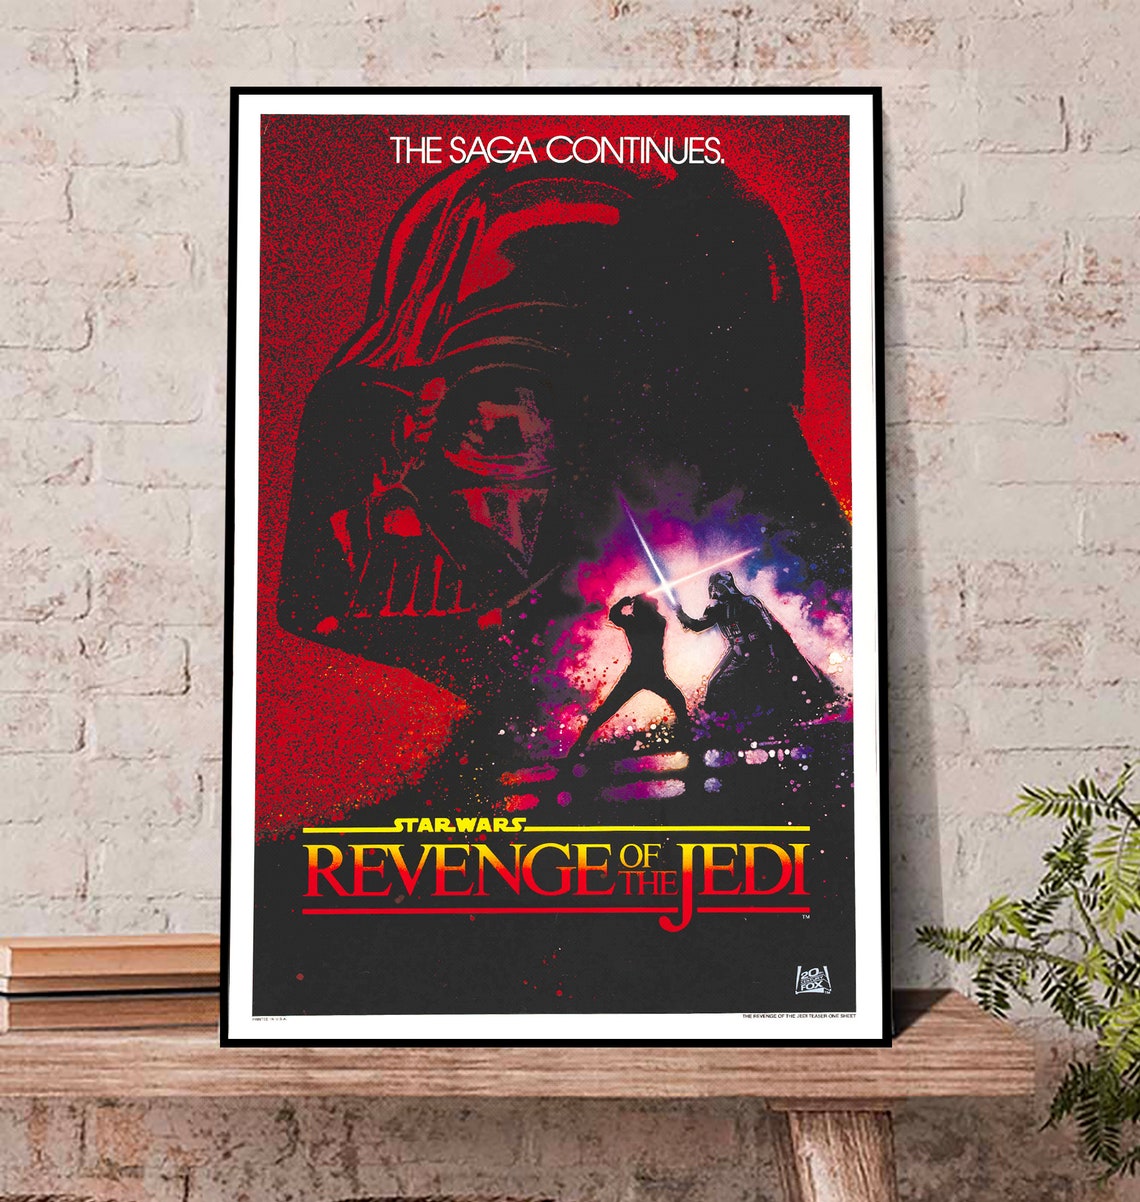 Star Wars revenge of the jedi Canvas Poster, Star Wars Vintage Poster, Star Wars Poster gift with  inches